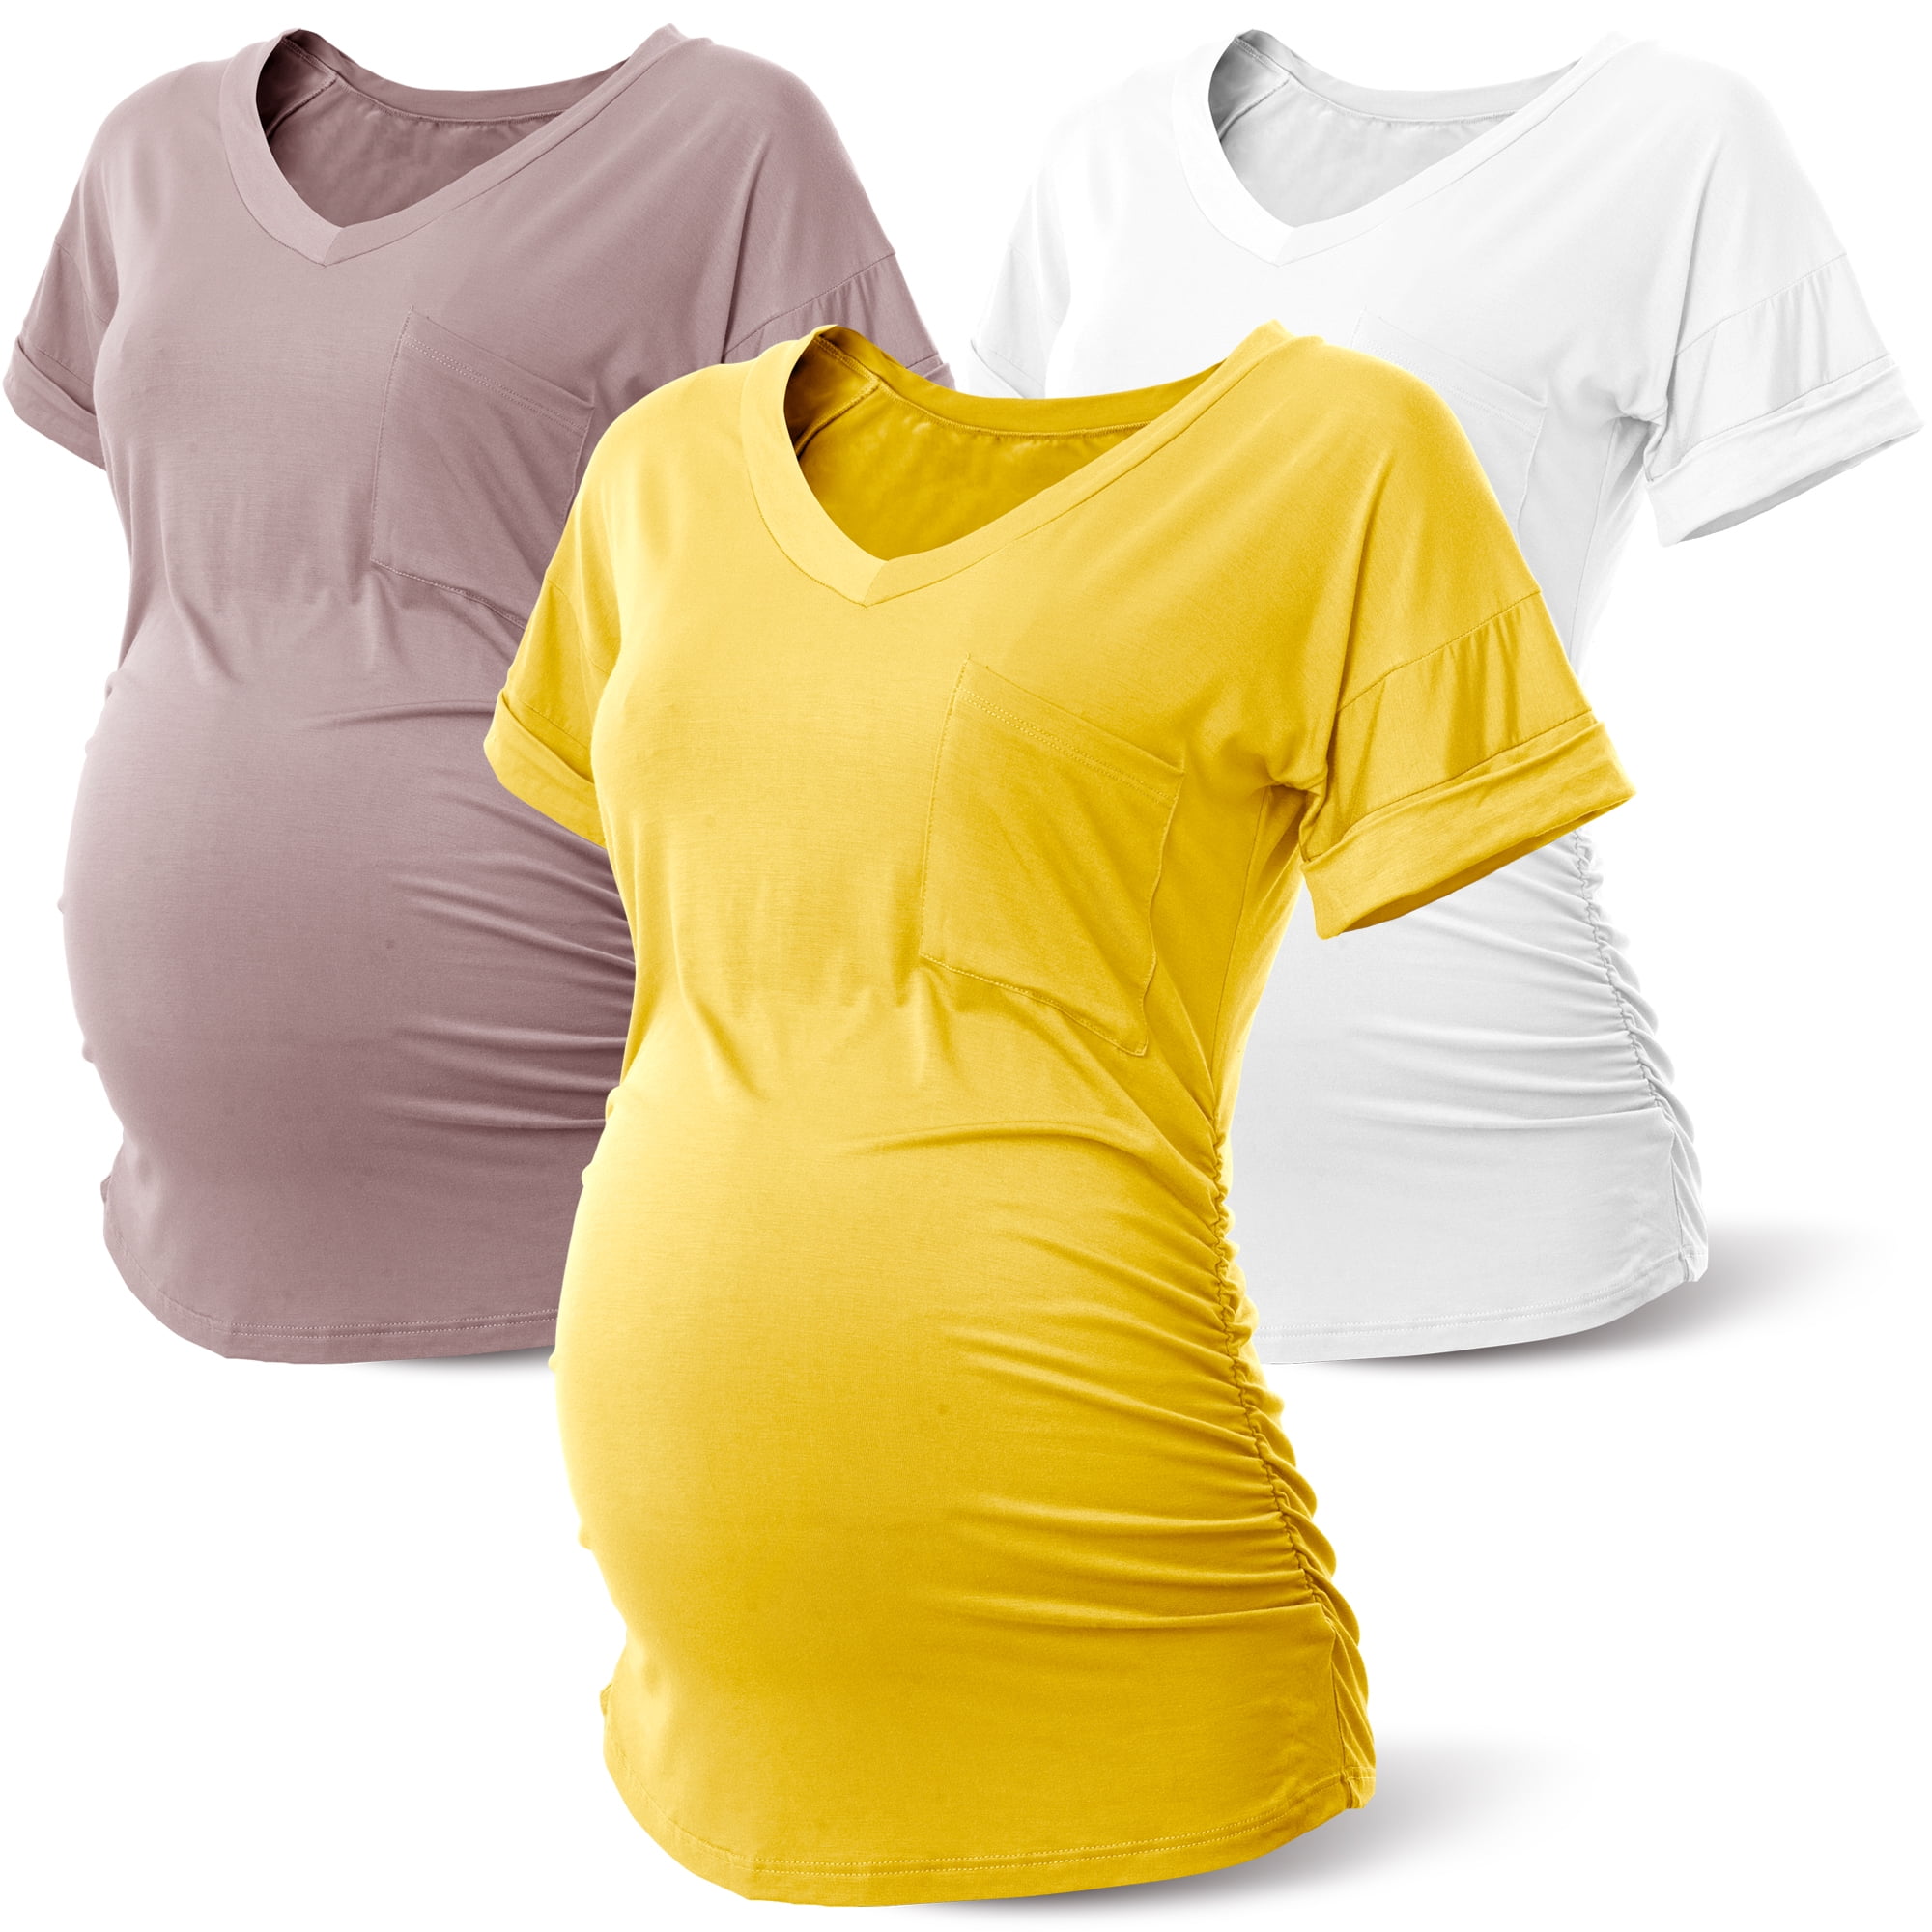 SUNNYBUY 3 Pack Womens Maternity Tops Side Ruched Maternity Shirts Pregnancy Clothes V Neck 